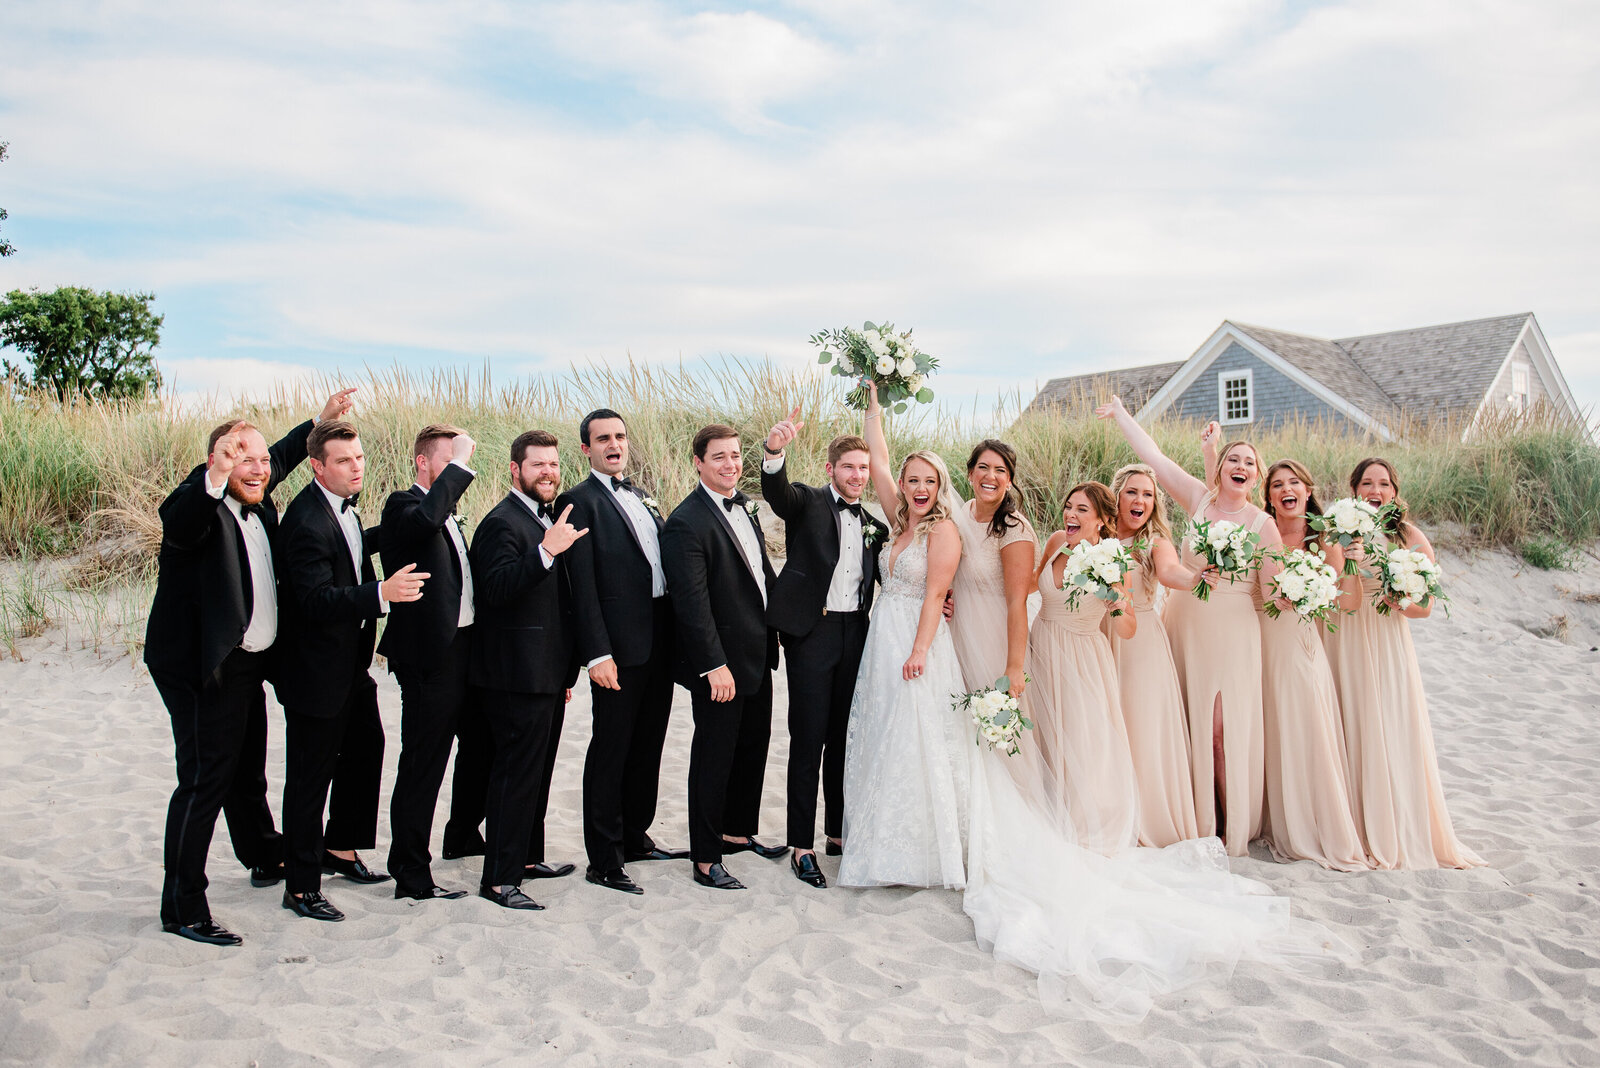 bridal party at a wedding on the beach cheering